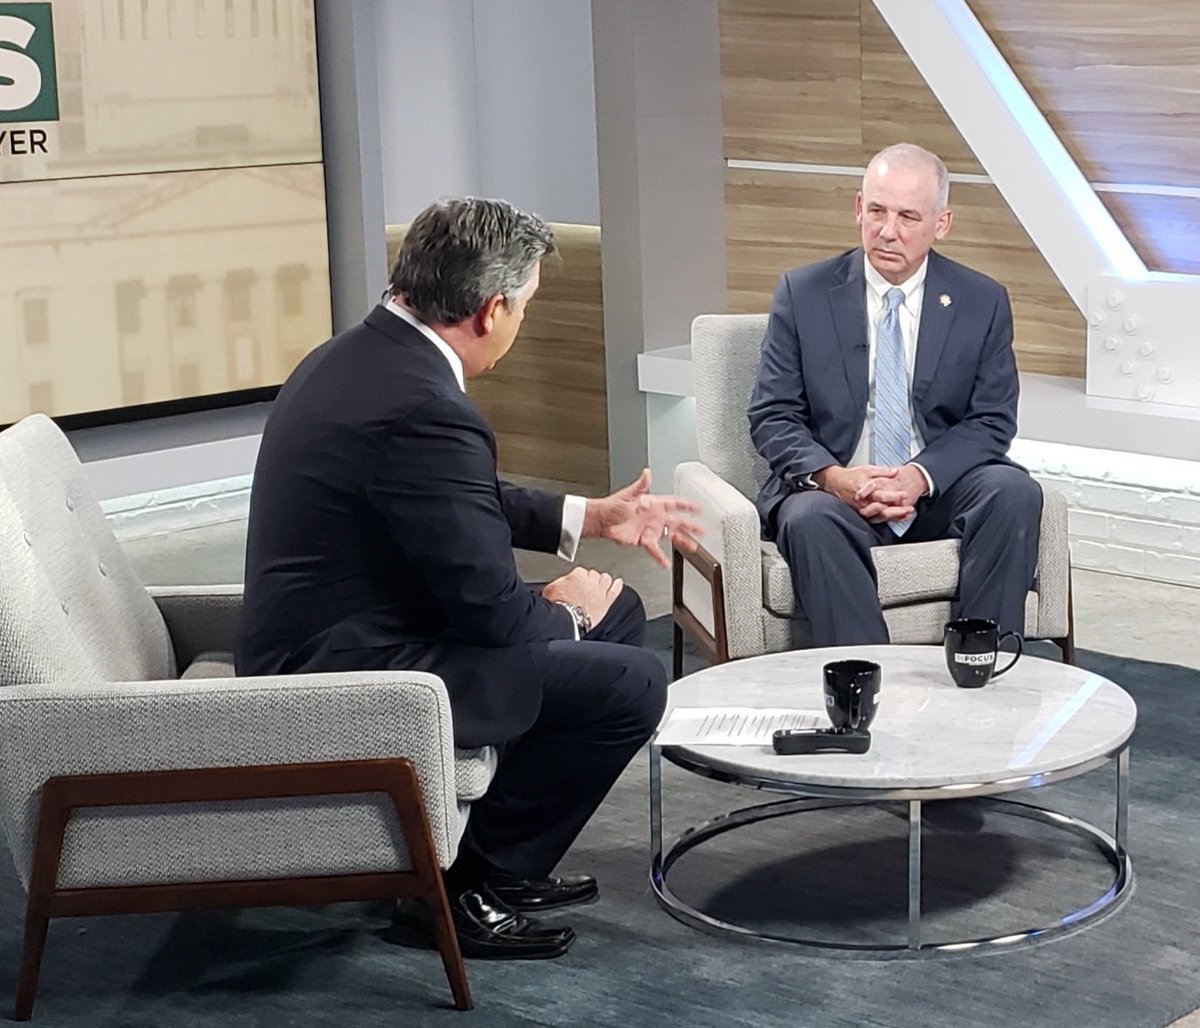 This week @OhioSenateGOP President @matthuffman1 talks with @SpectrumNews1OH In Focus anchor Mike Kallmeyer about Senate Bill 1, priority education reforms at the Department of Education focused on accountability and results. Spectruminfocus.com